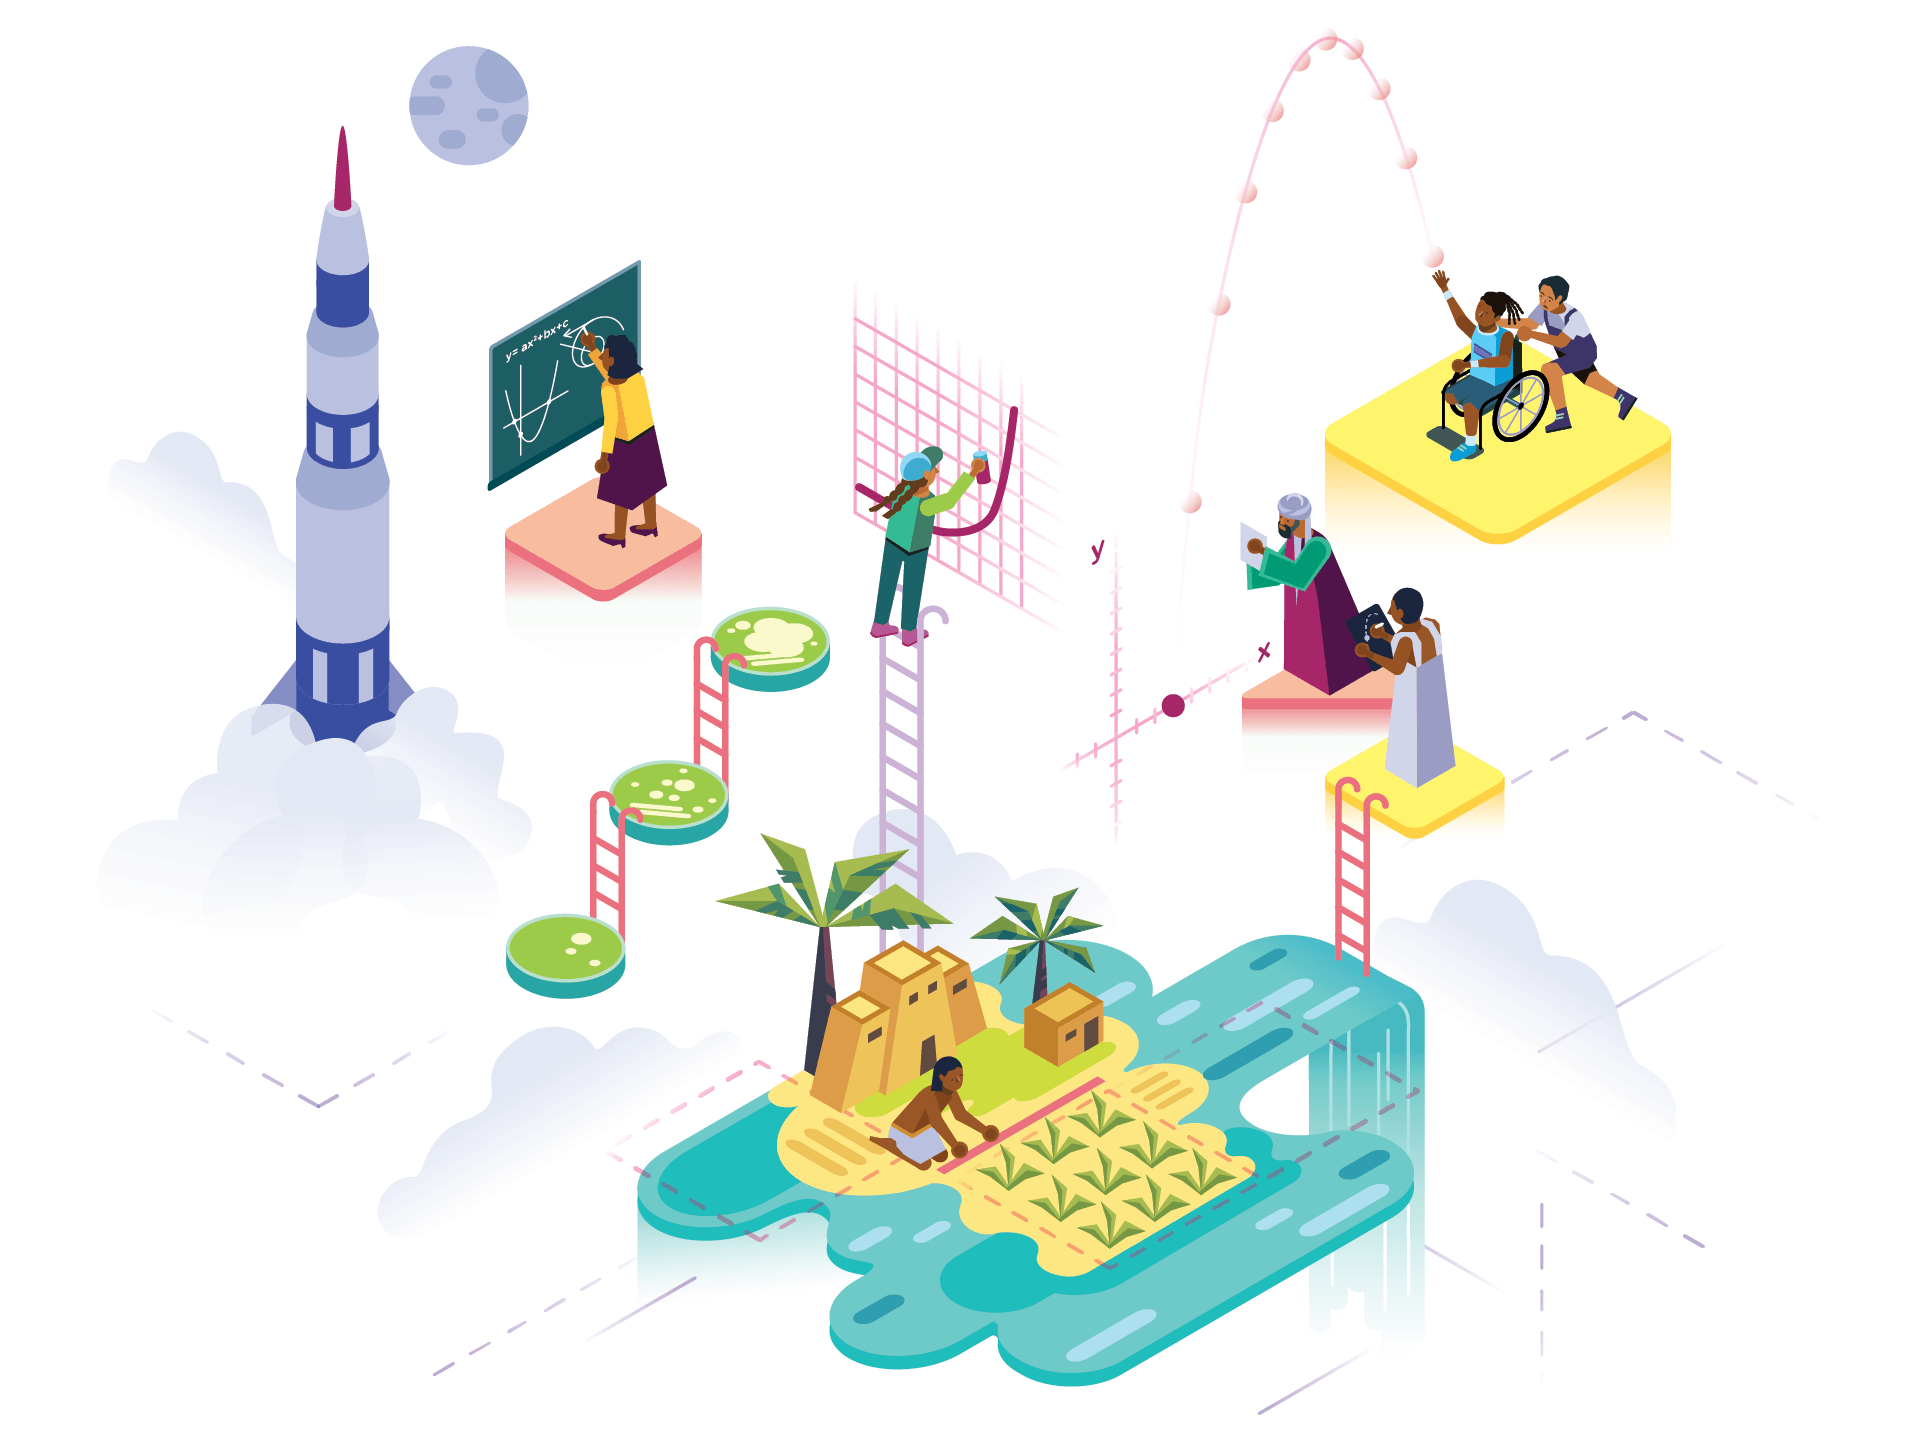 Isometric illustration depicting various educational and scientific activities, including a rocket launch, classroom teaching using ſֱ curriculum, laboratory experiments, agricultural research, and bridge construction.